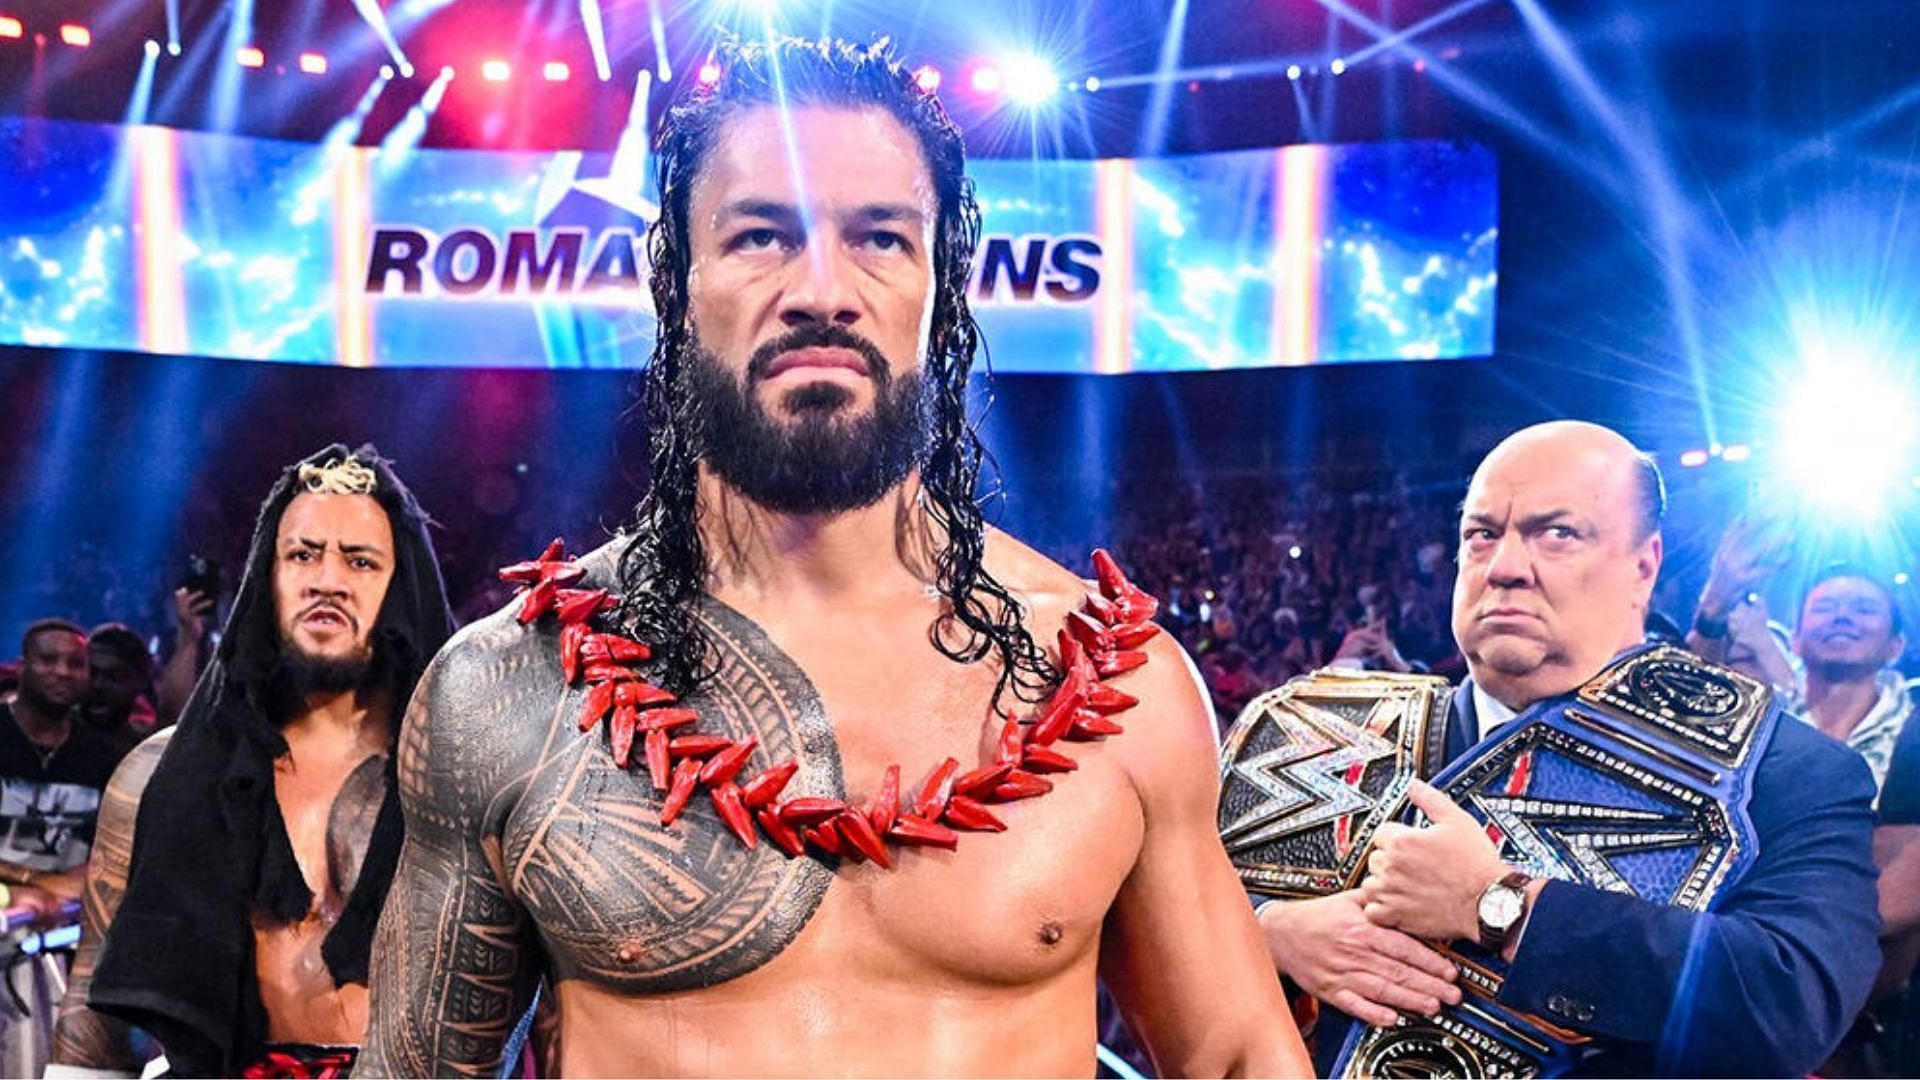 Roman Reigns is the face of the wrestling business (Credit: WWE)